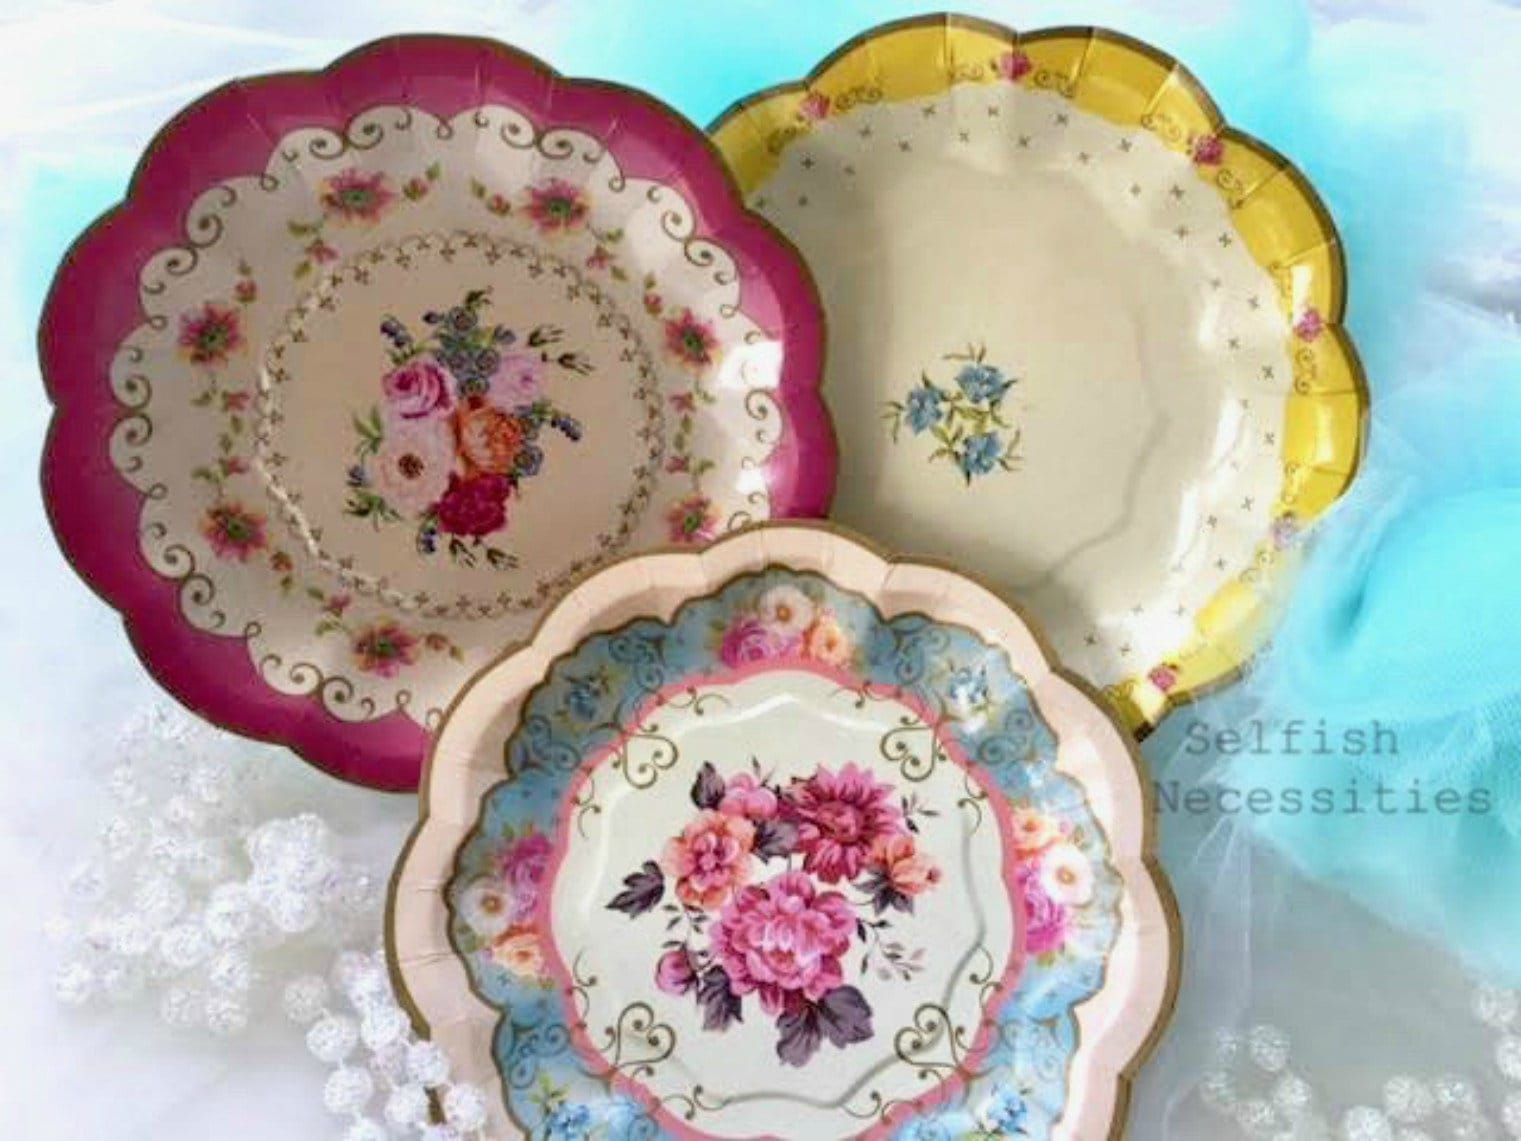 Sweet 16 'Blush' Small Paper Plates (8ct) - The Party Place - Fort Smith